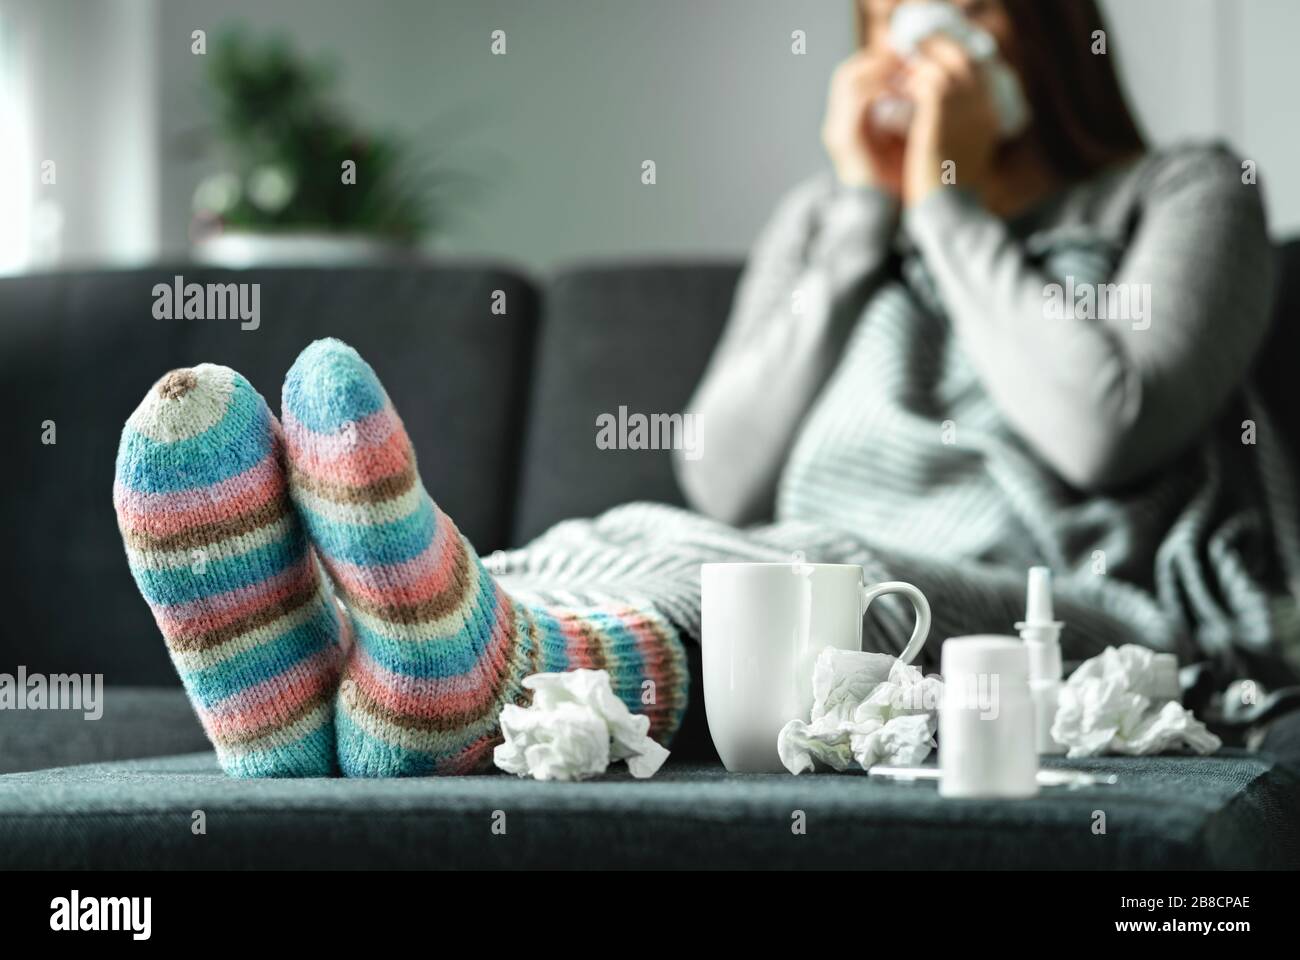 Sick woman with flu, cold, fever and cough sitting on couch at home. Ill person blowing nose and sneezing with tissue and handkerchief. Woolen socks. Stock Photo